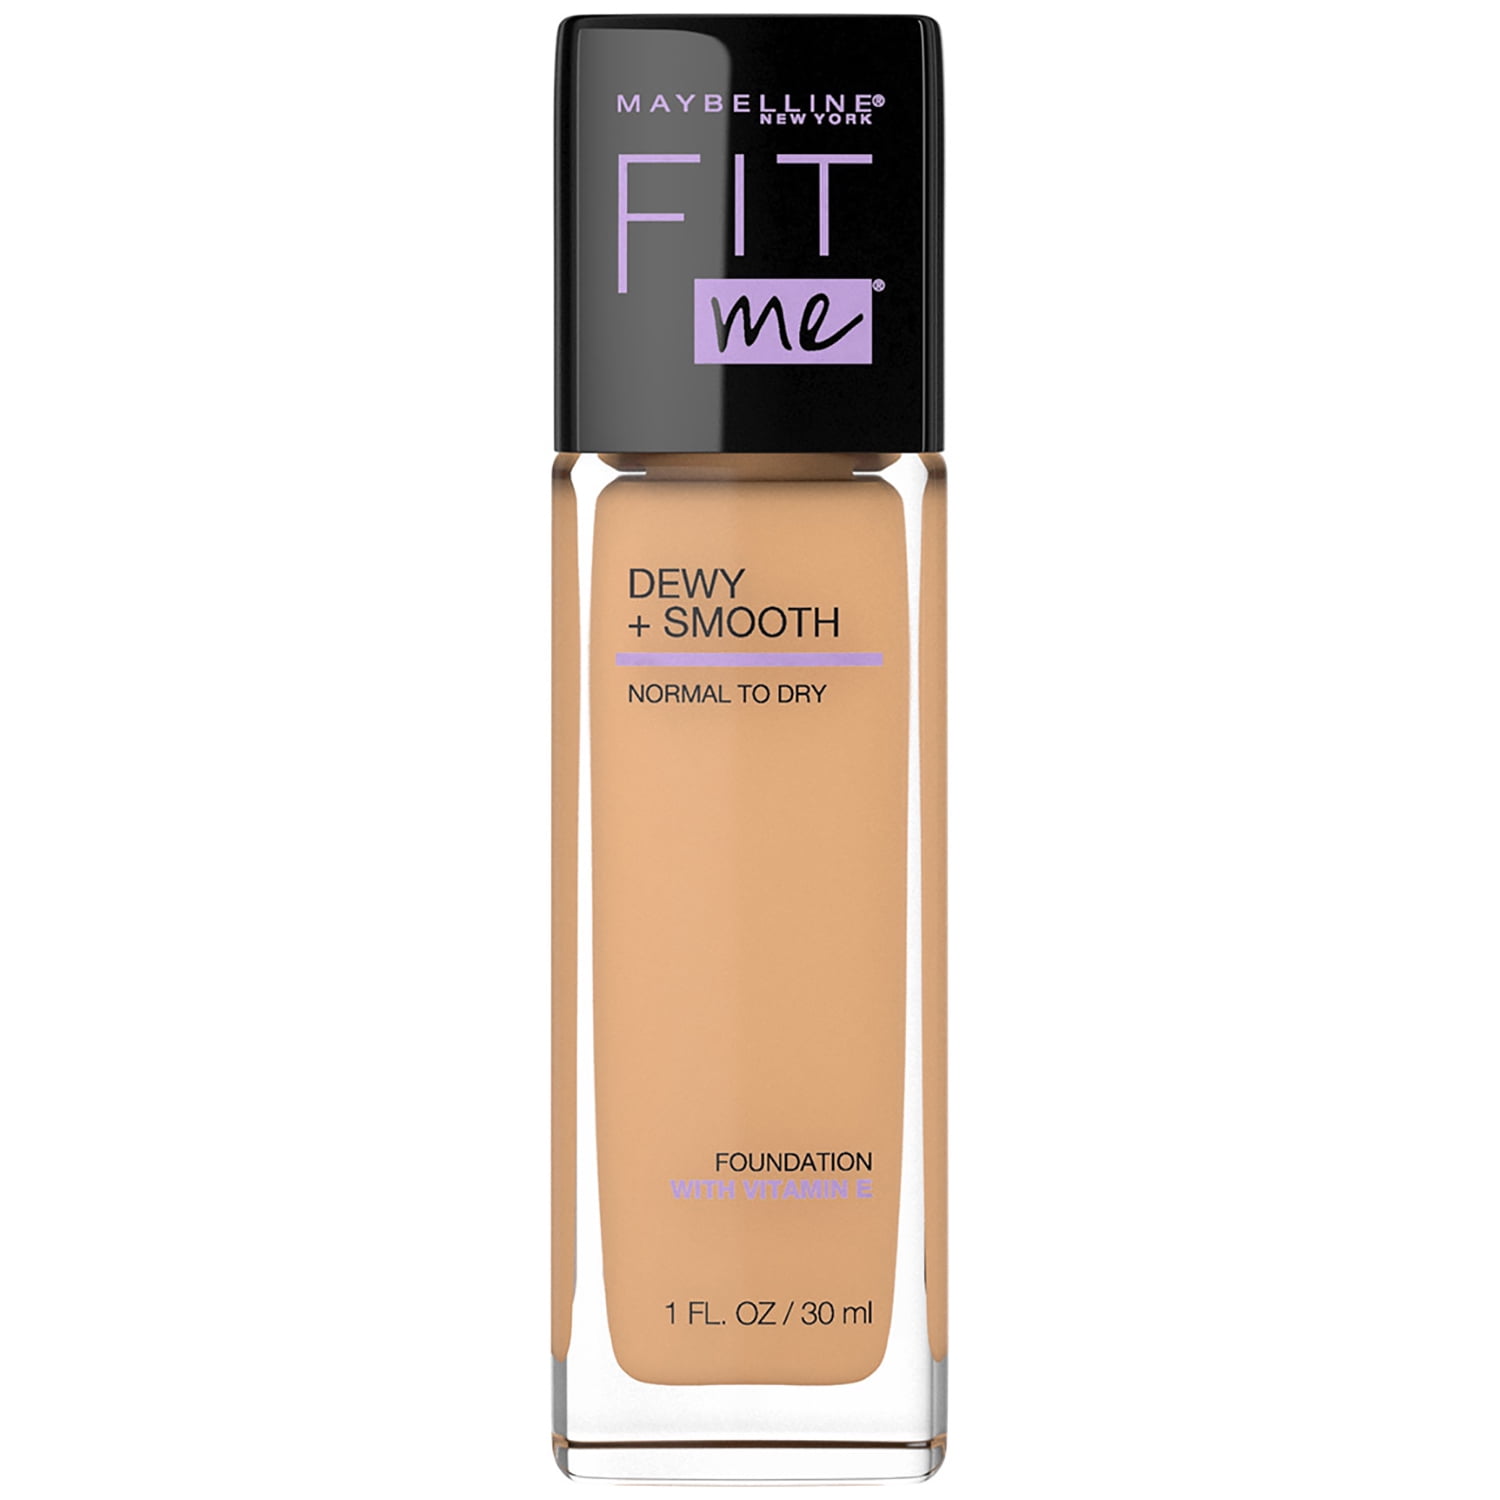 Maybelline Fit Me Dewy + Smooth Liquid Foundation Makeup with SPF 18, Sun Beige, 1 fl oz